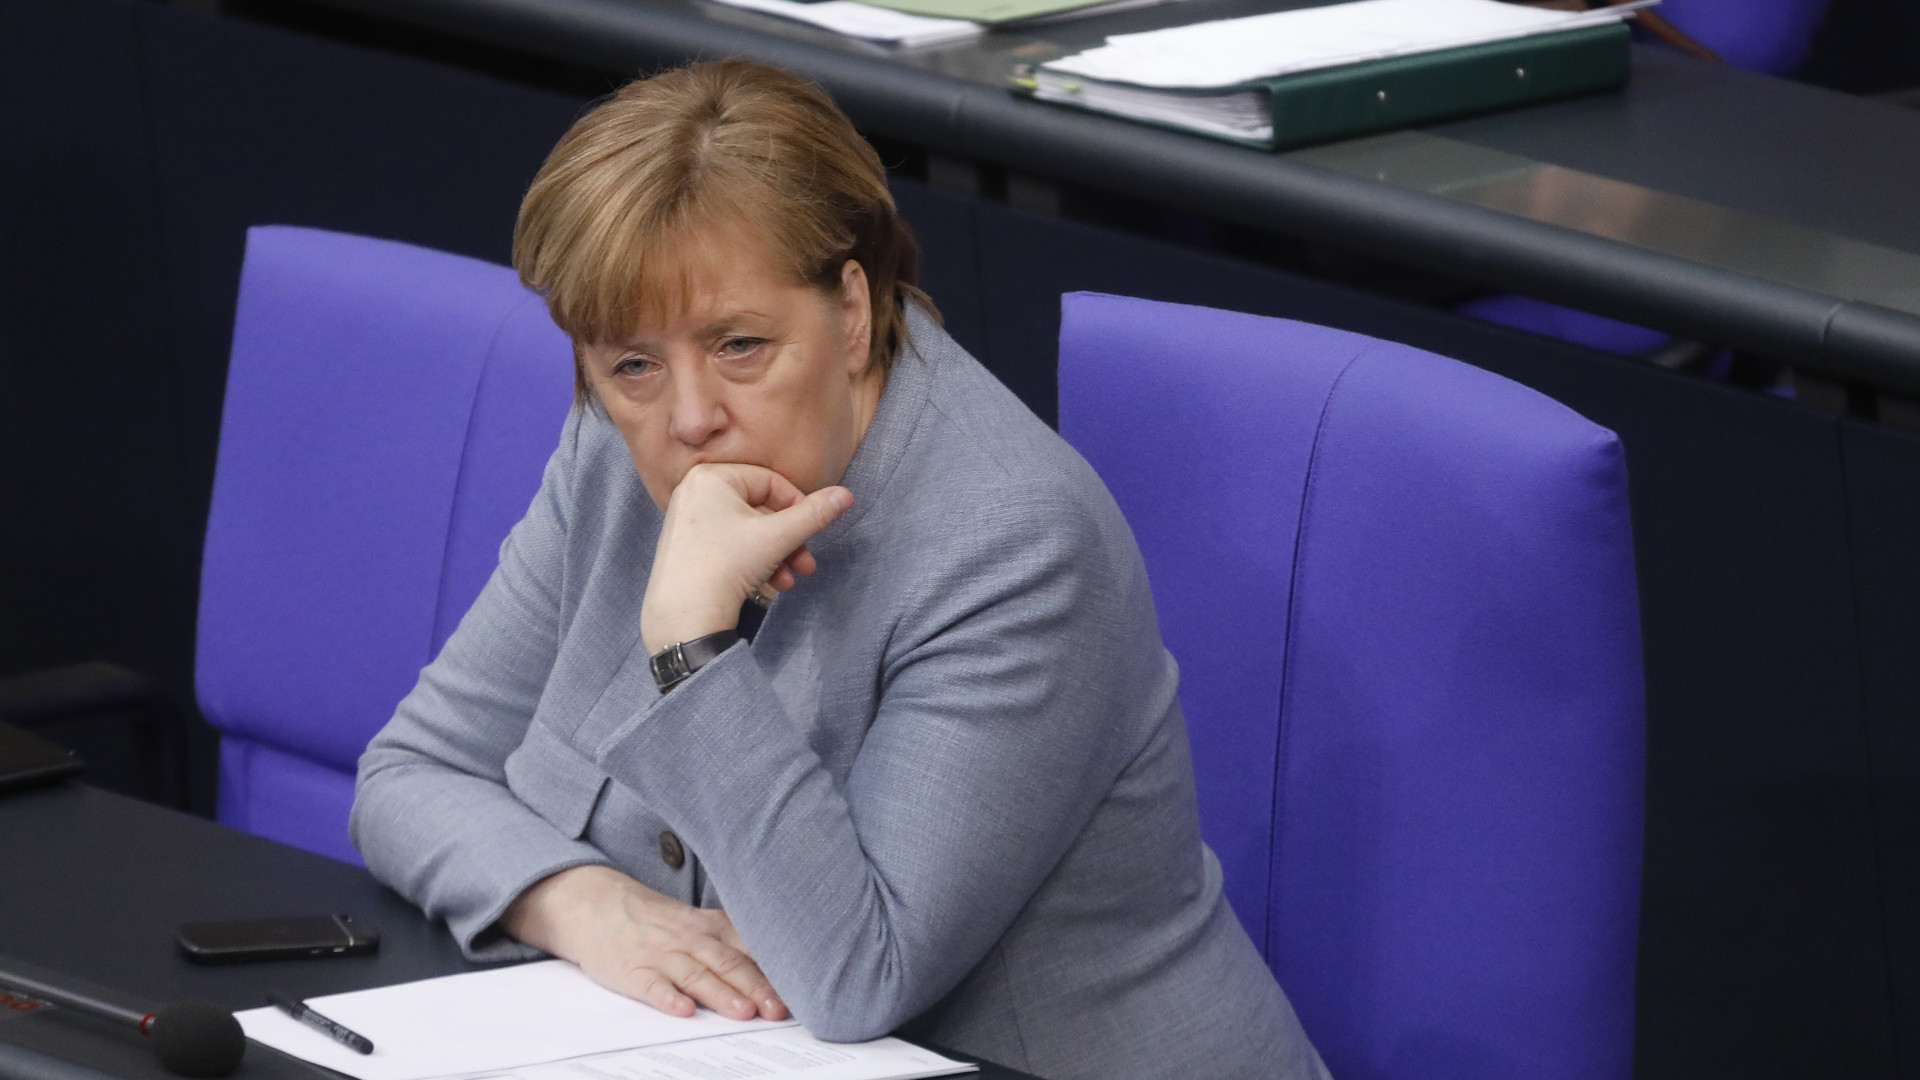 With Angela Merkel gone, his entire party could fail